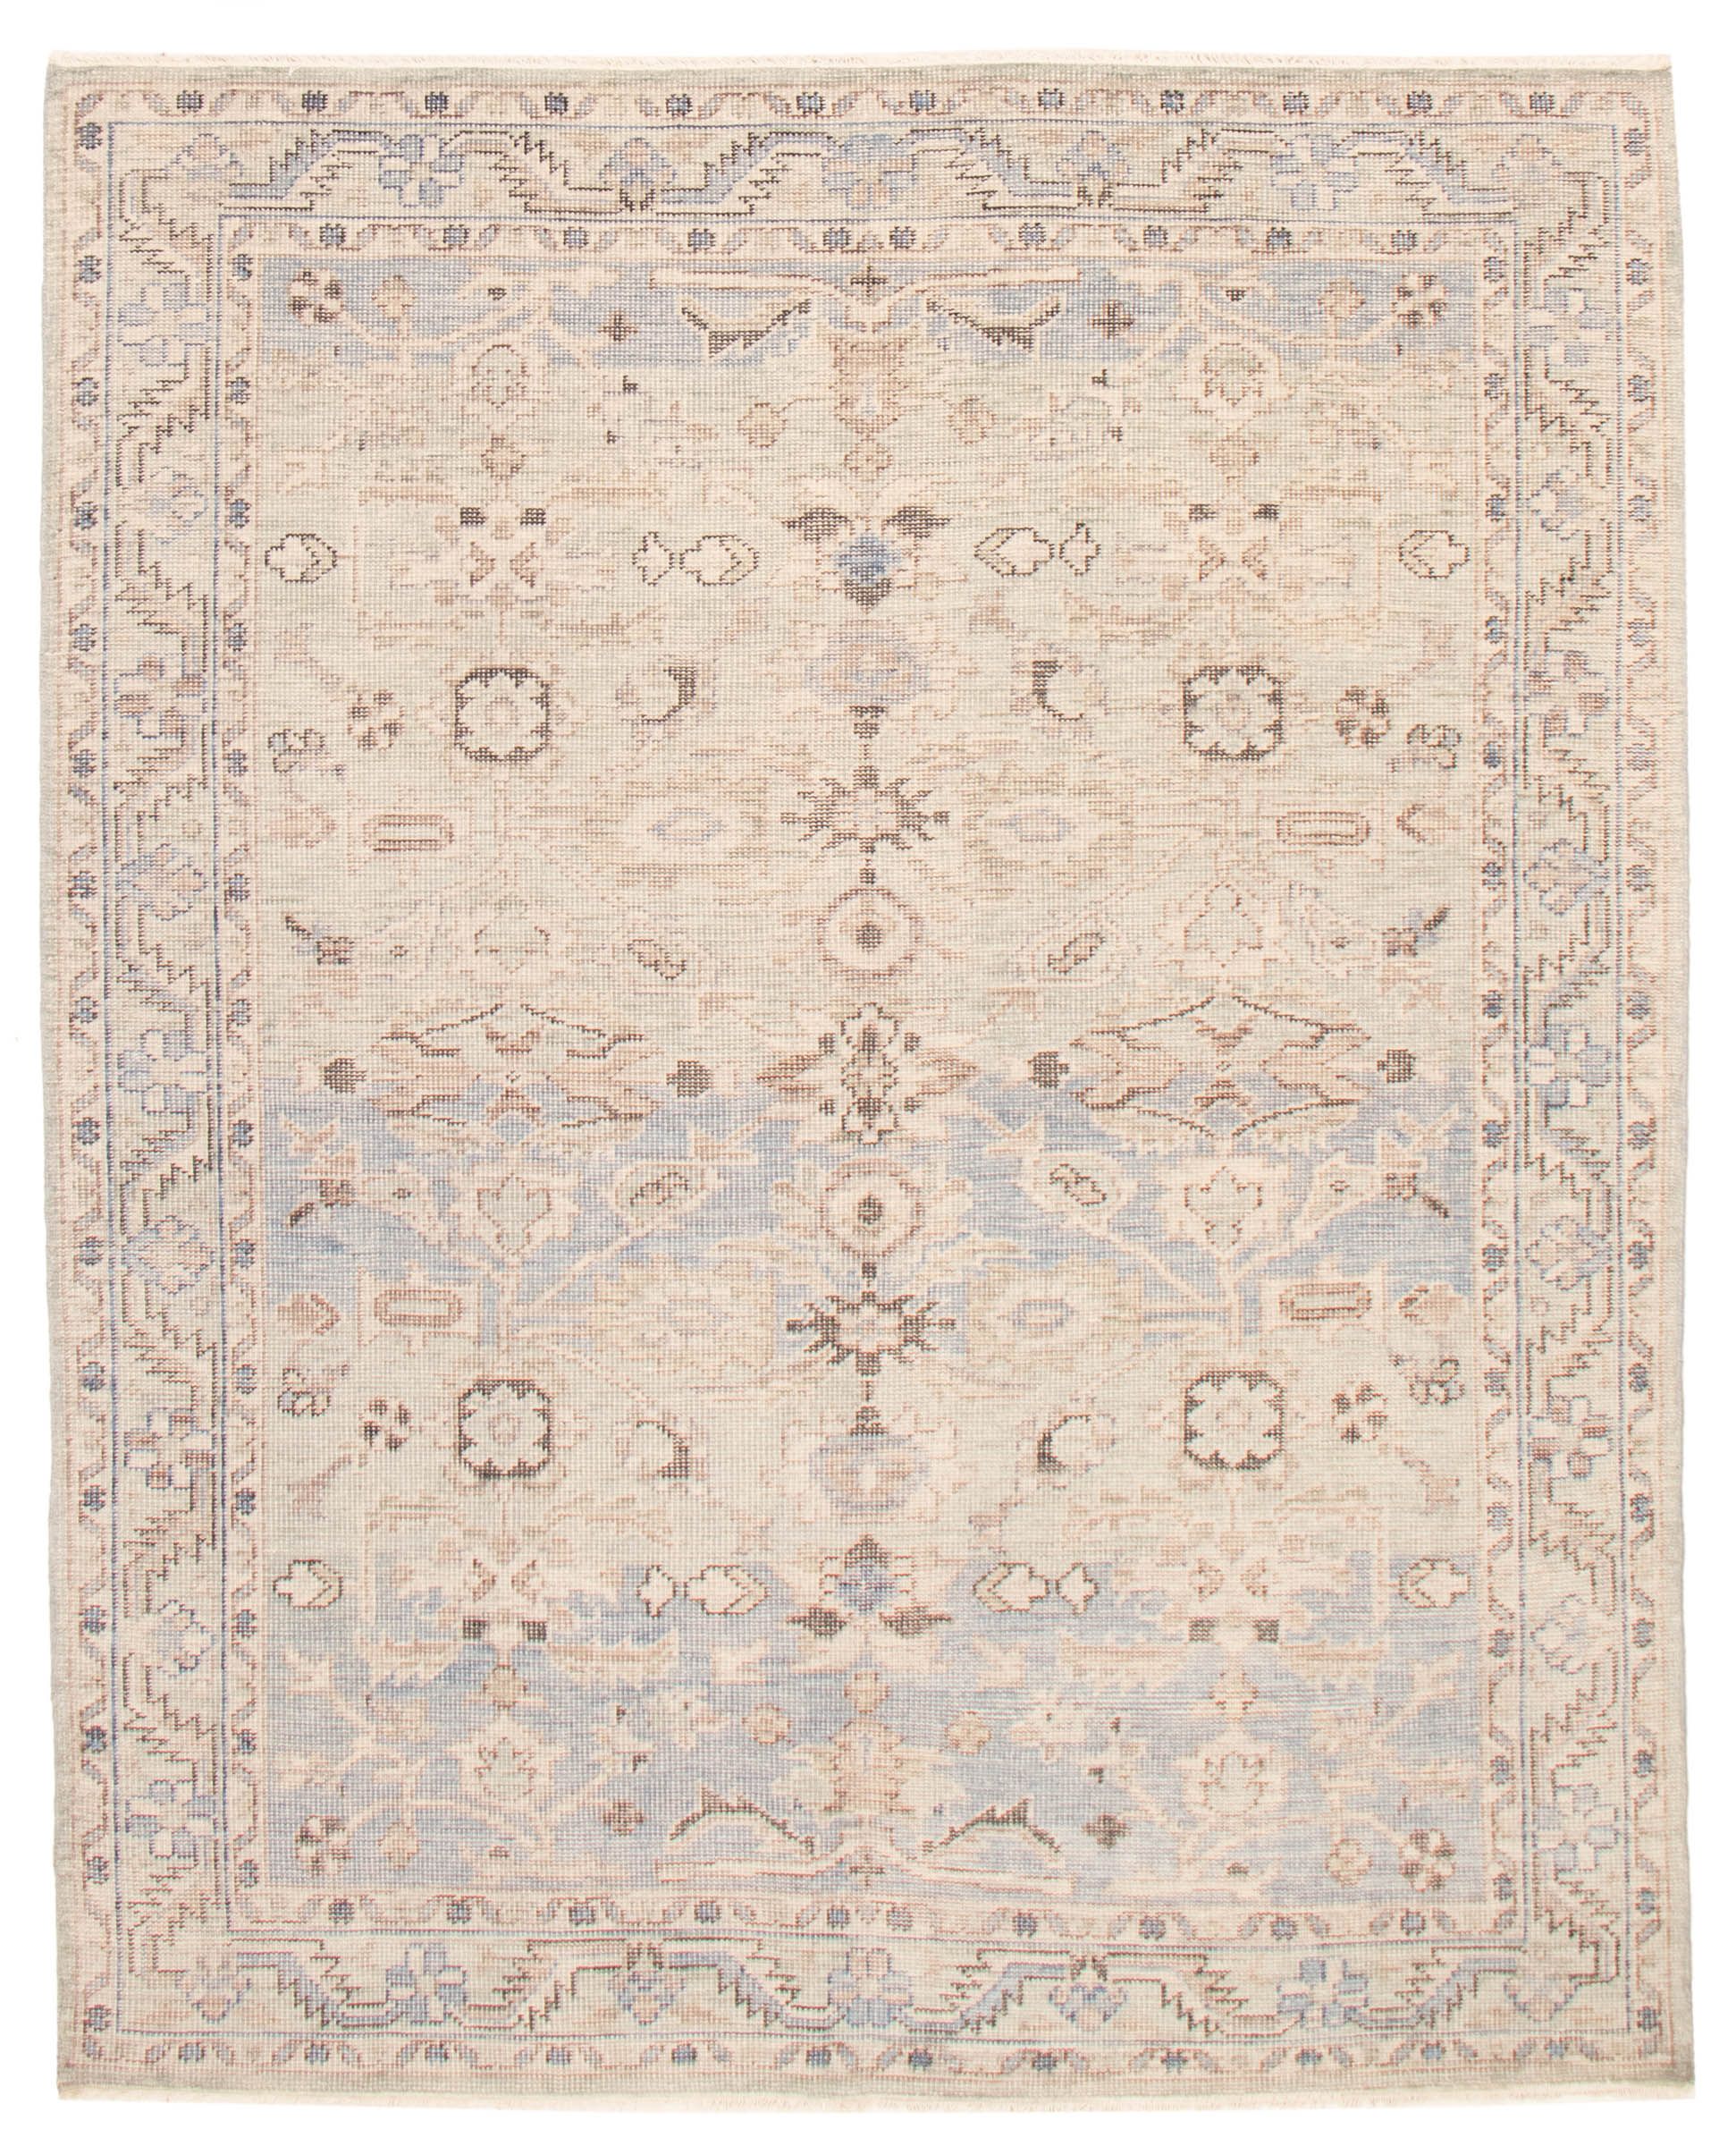 330799 Bedroom eCarpet Gallery Large Area Rug for Living Room Chobi Finest Bordered Red Rug 8'0 x 10'0 Hand-Knotted Wool Rug 